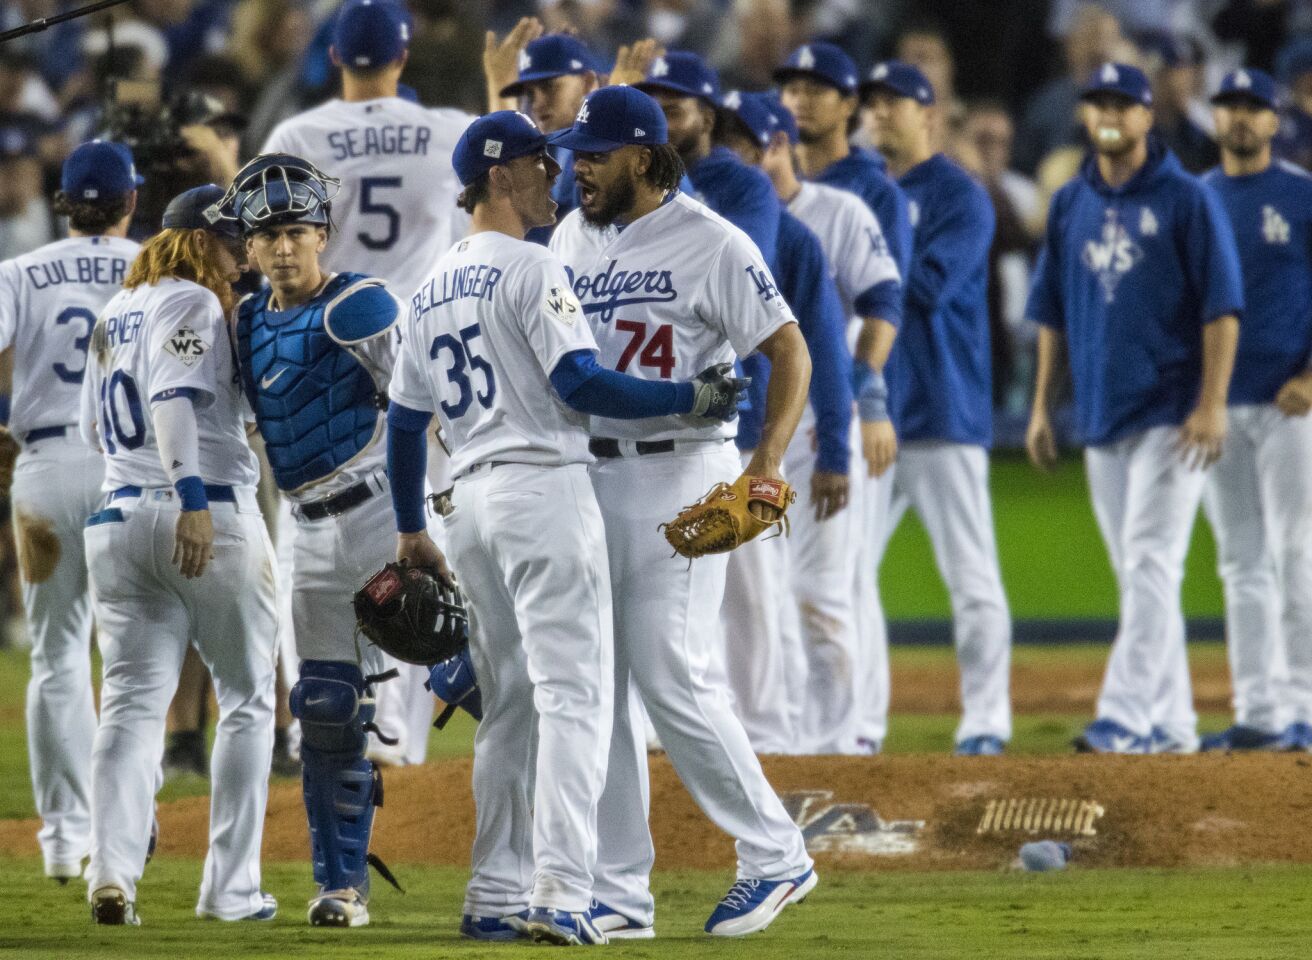 Kenley Jansen embraces Cody Bellinger after the Dodgers win game 6.